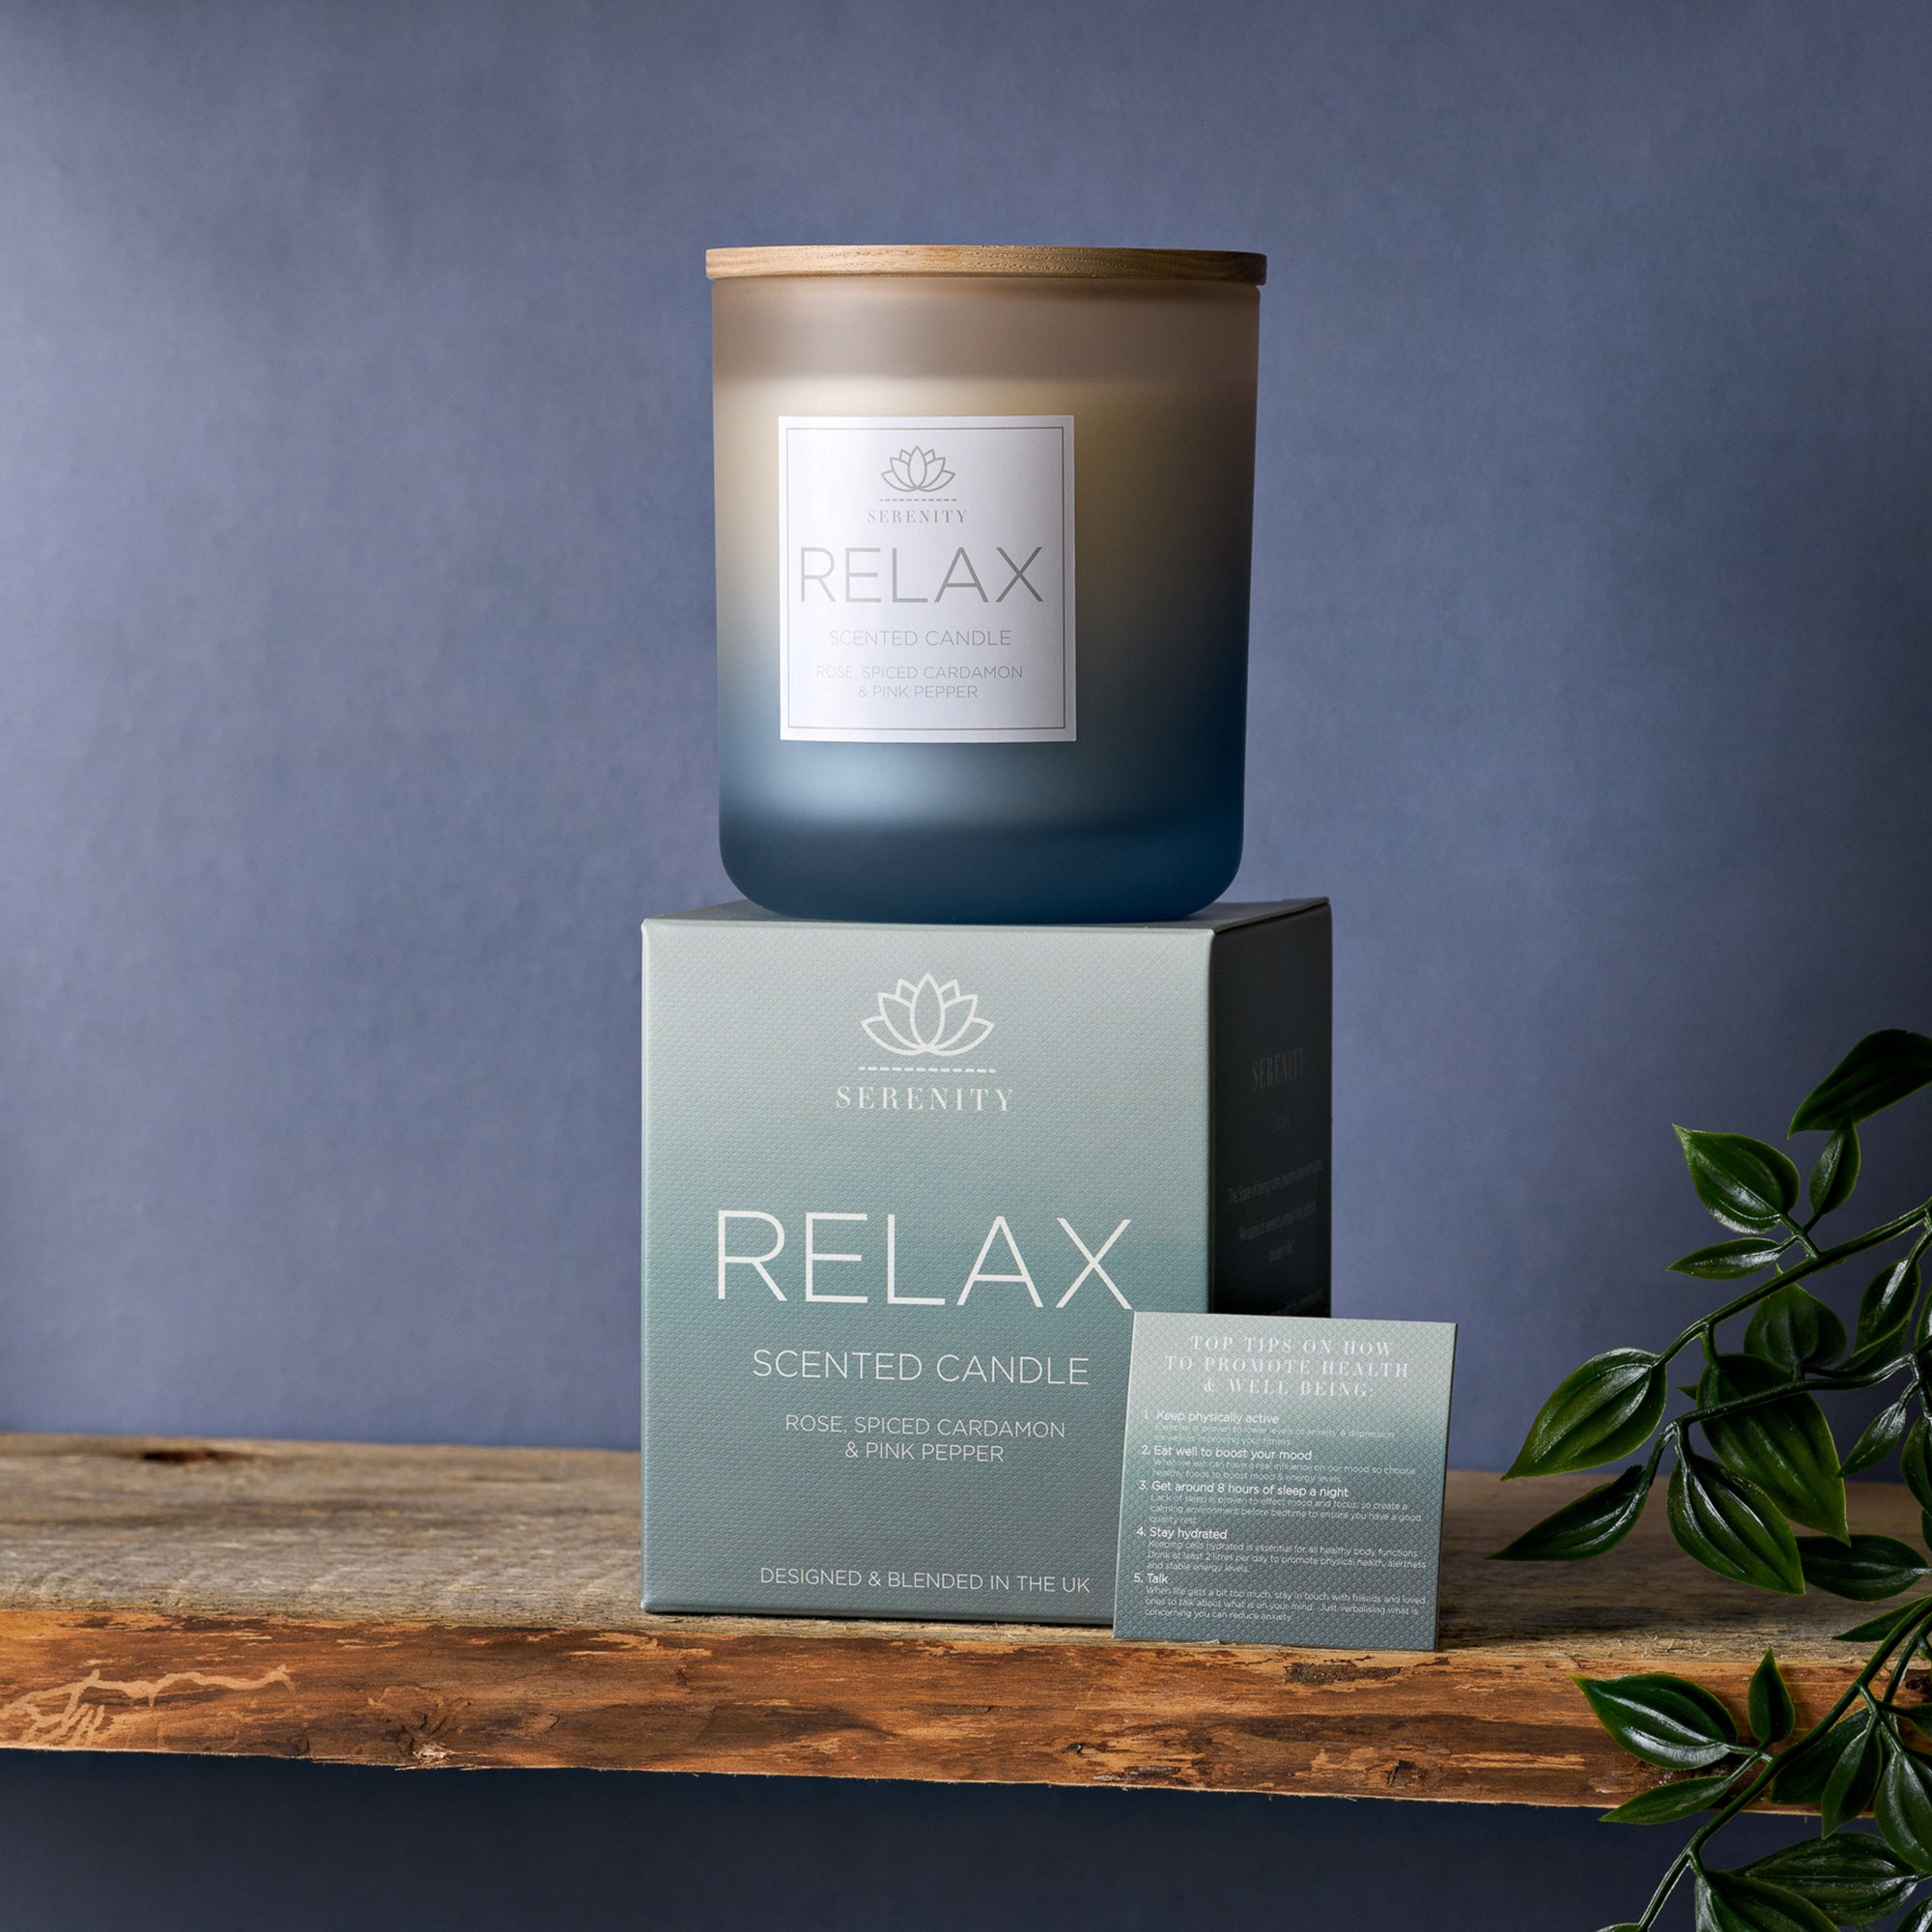 Serenity Relax Rose, Cardamon and Pink Pepper Candle